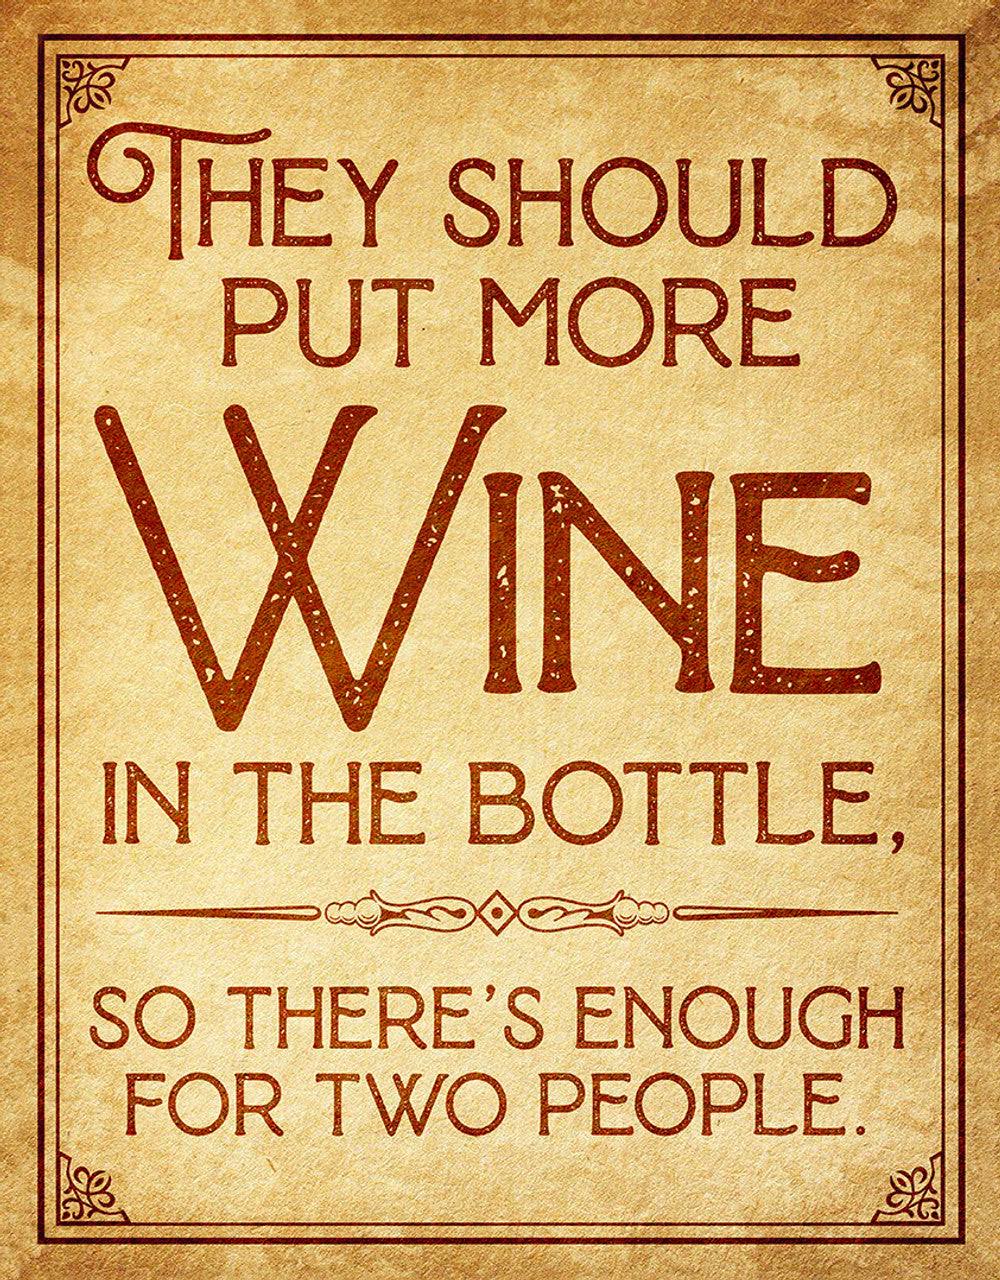 More Wine in Bottle 12.5" x 16" Metal Tin Sign - 2687